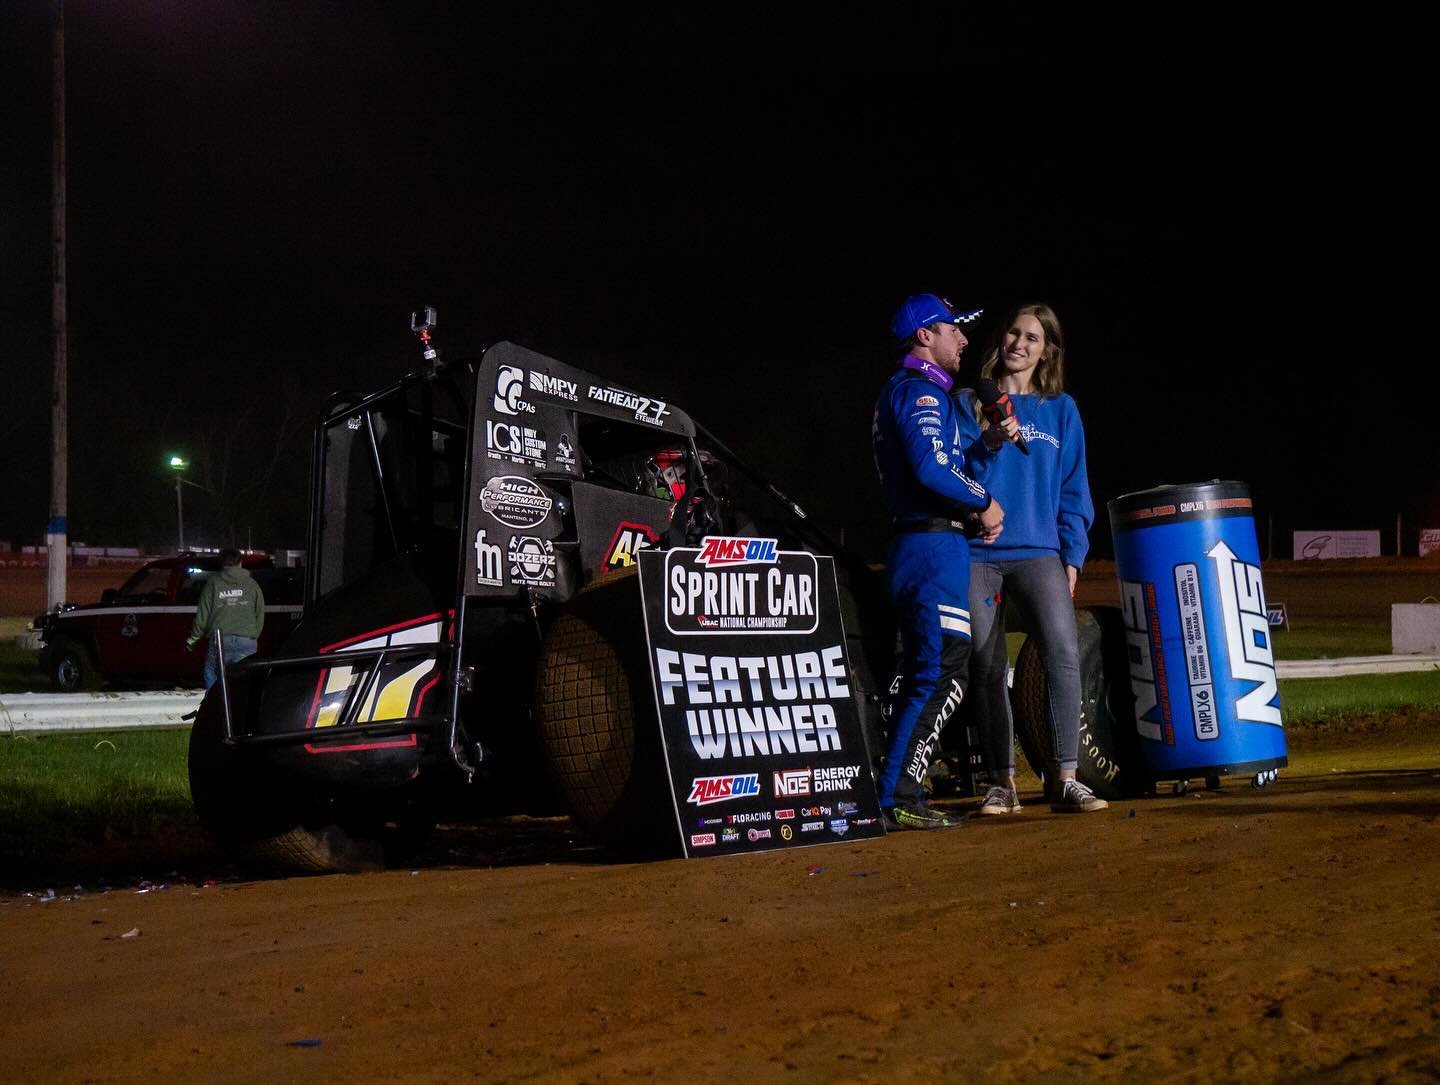 Last weekend, Logan Seavey scored a dominant win at Bloomington Speedway and claimed a top-10 at Tri-State Speedway. At Bloomington, Seavey won his heat race and drove to the lead of the feature. Before a late yellow, at one point had nearly a half o